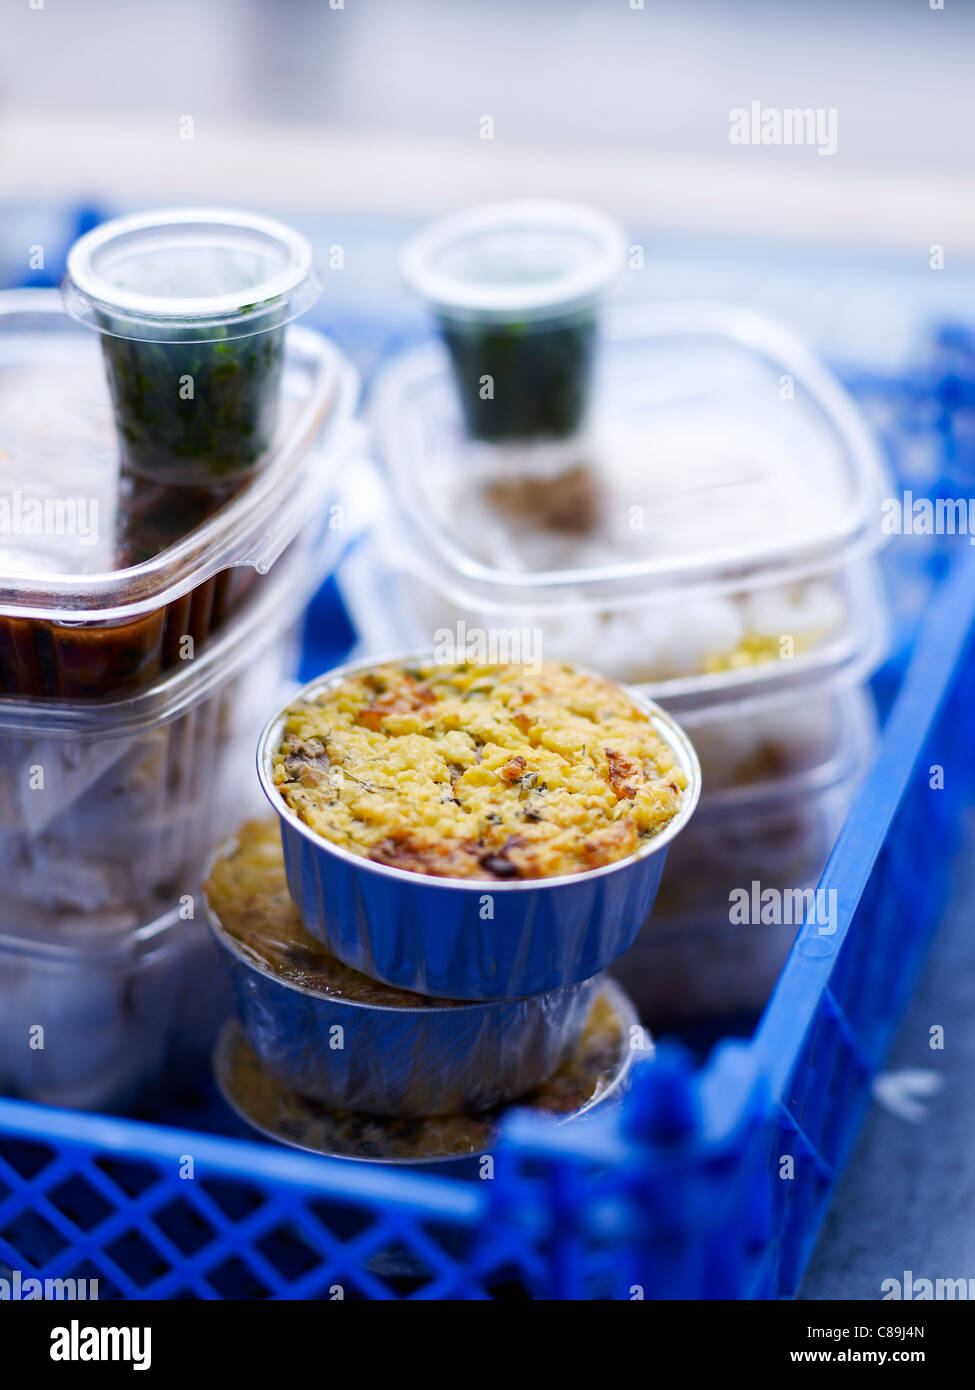 Plastic containers of ready cooked meals Stock Photo